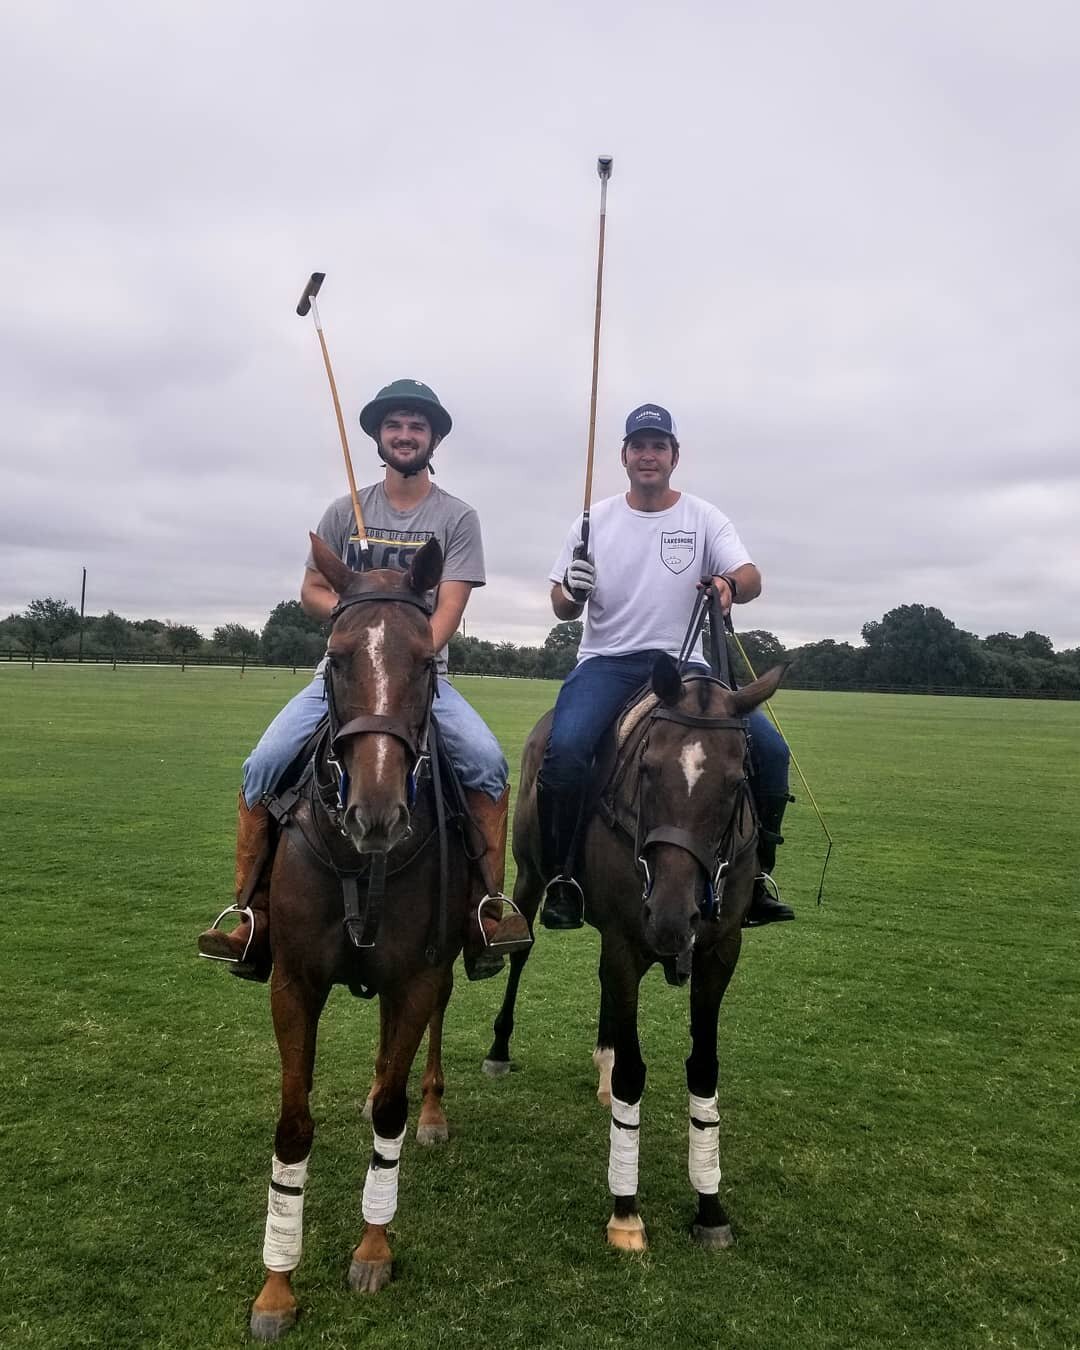 JT played through high school and college (for @smupoloteam), and is now getting back into the groove of the game 🤠⁣
⁣
#dallaspolo #friscopolo #dentonpolo #texaspolo #littleelm #thisispolo #pololife #equestrianlife #adrenalinedallas #adrenalinetexas